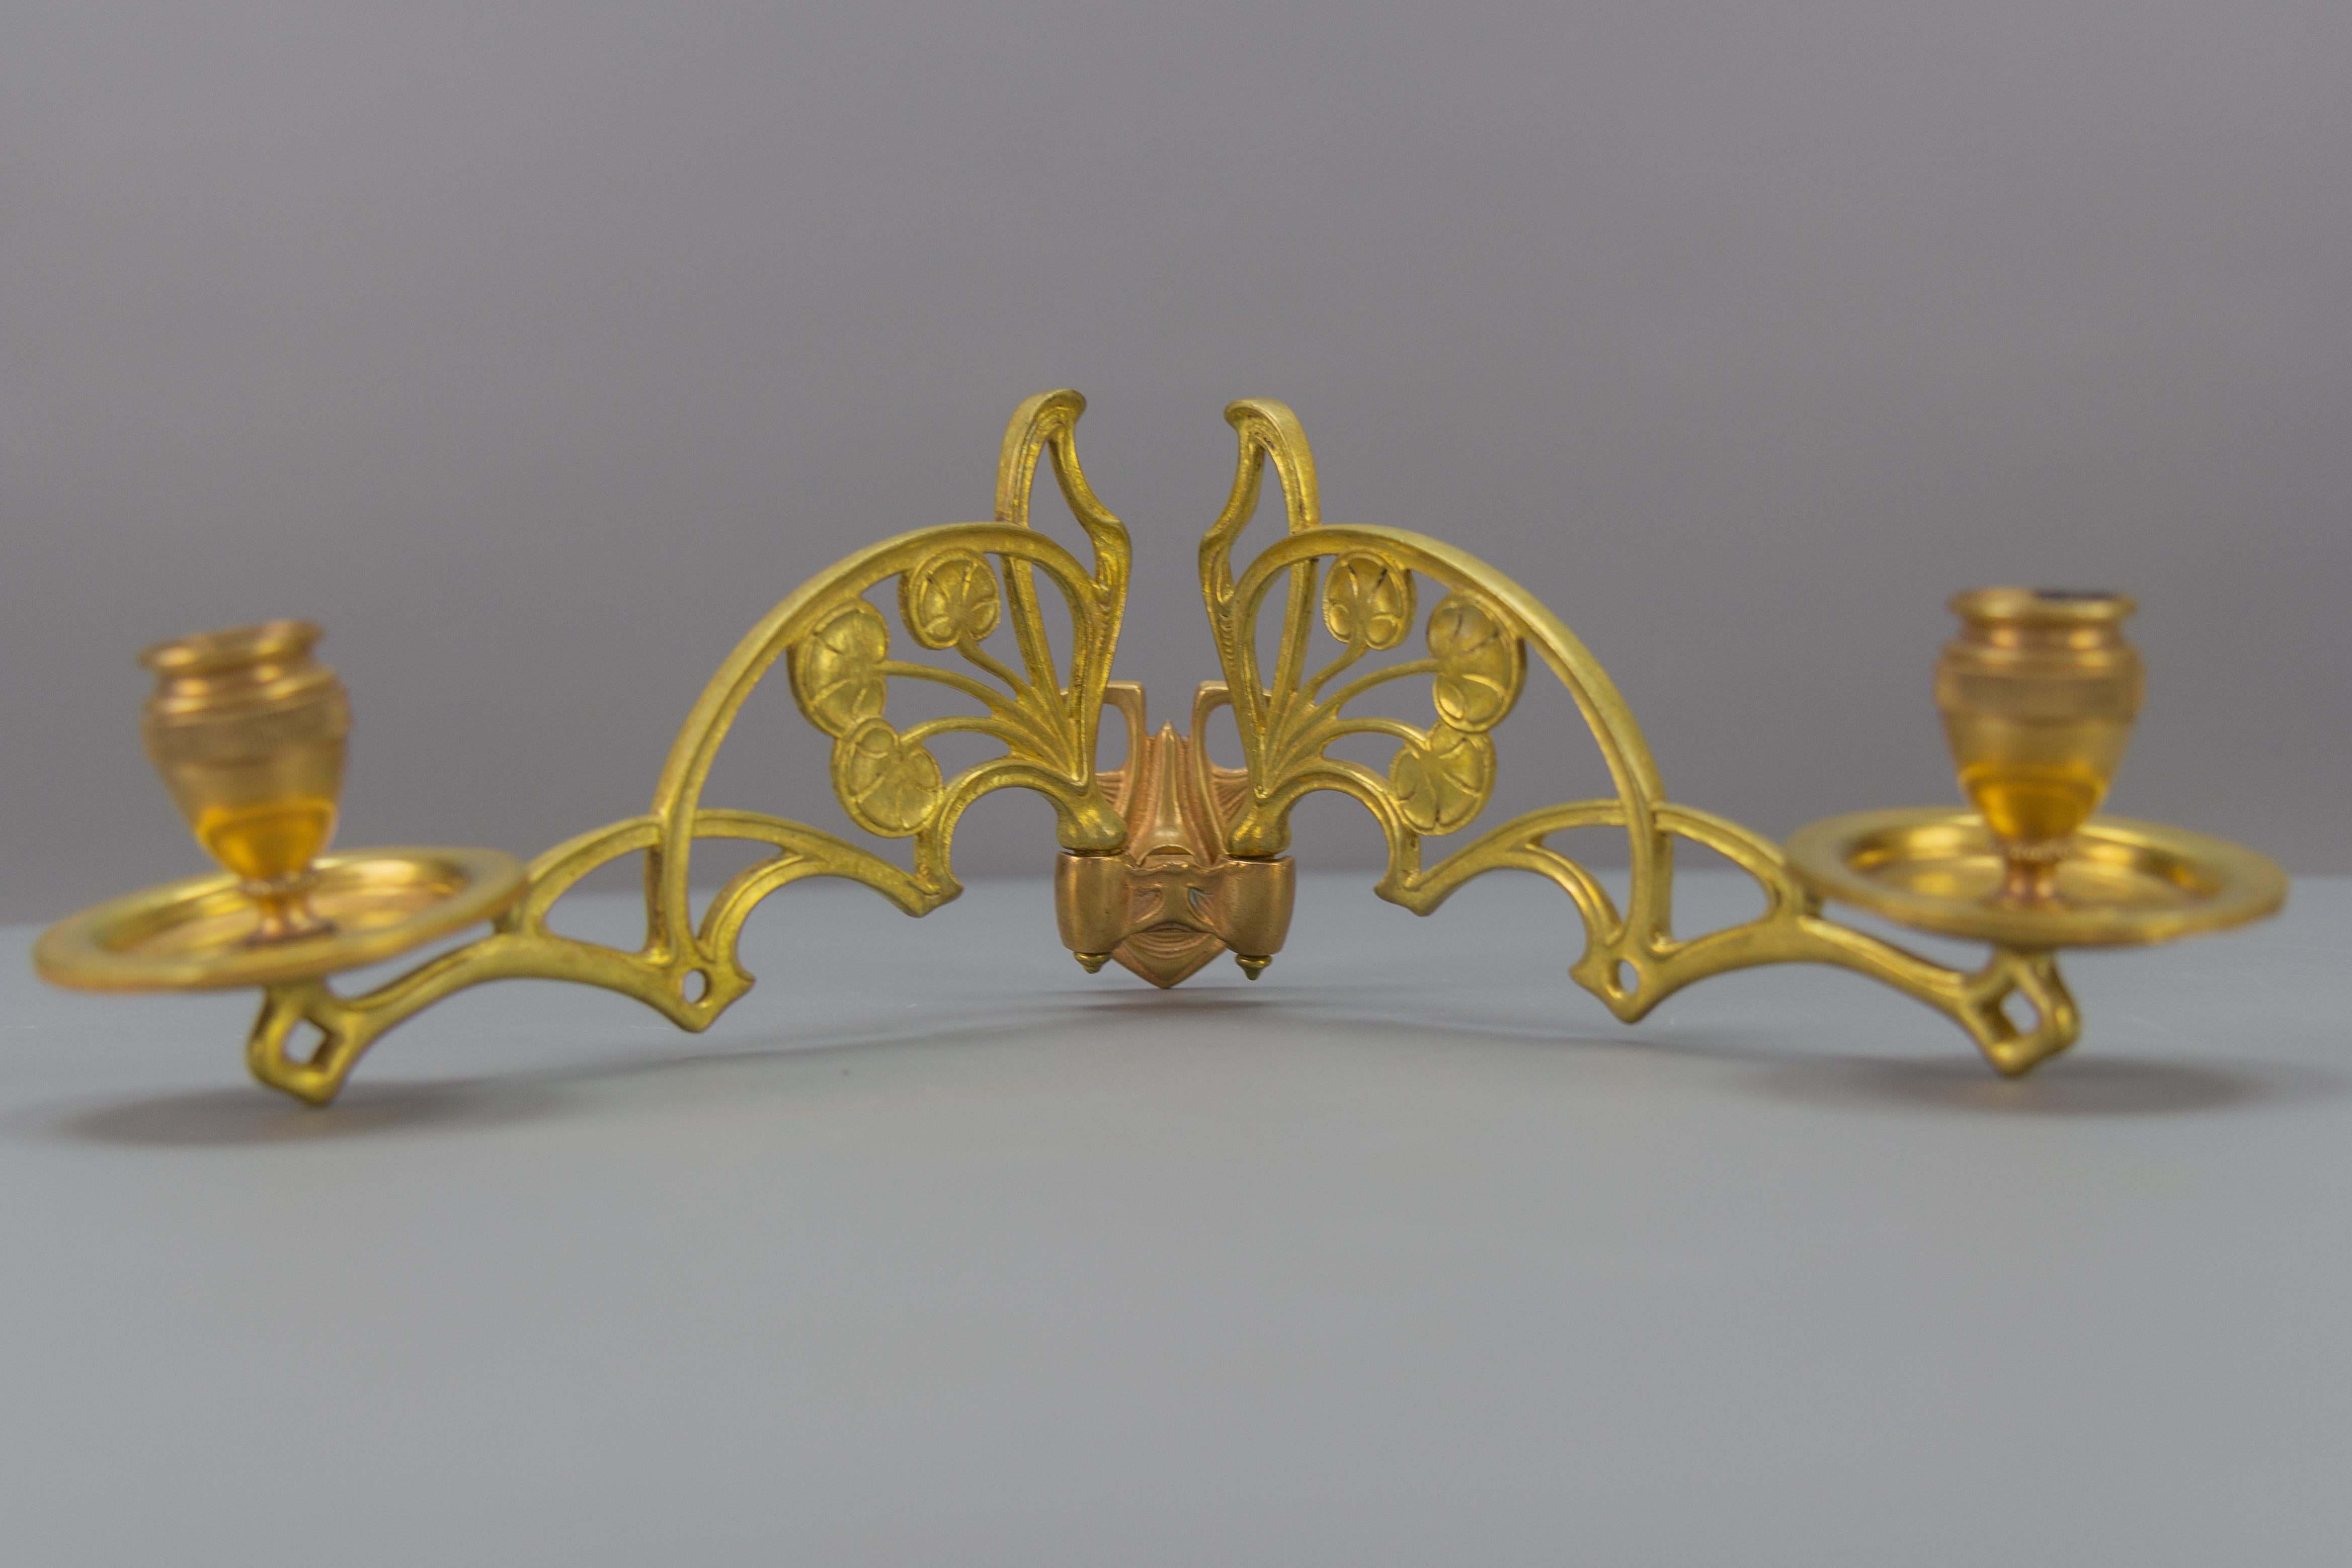 A beautiful Art Nouveau ornate piano or wall sconce, candle holder with adorable leaf decors, and two arms. Made of brass and bronze, numbered on the backside. France, 1920s.
Dimensions: Height 13 cm / 5.11 in; width 42 cm / 16.53 in; depth 22 cm /